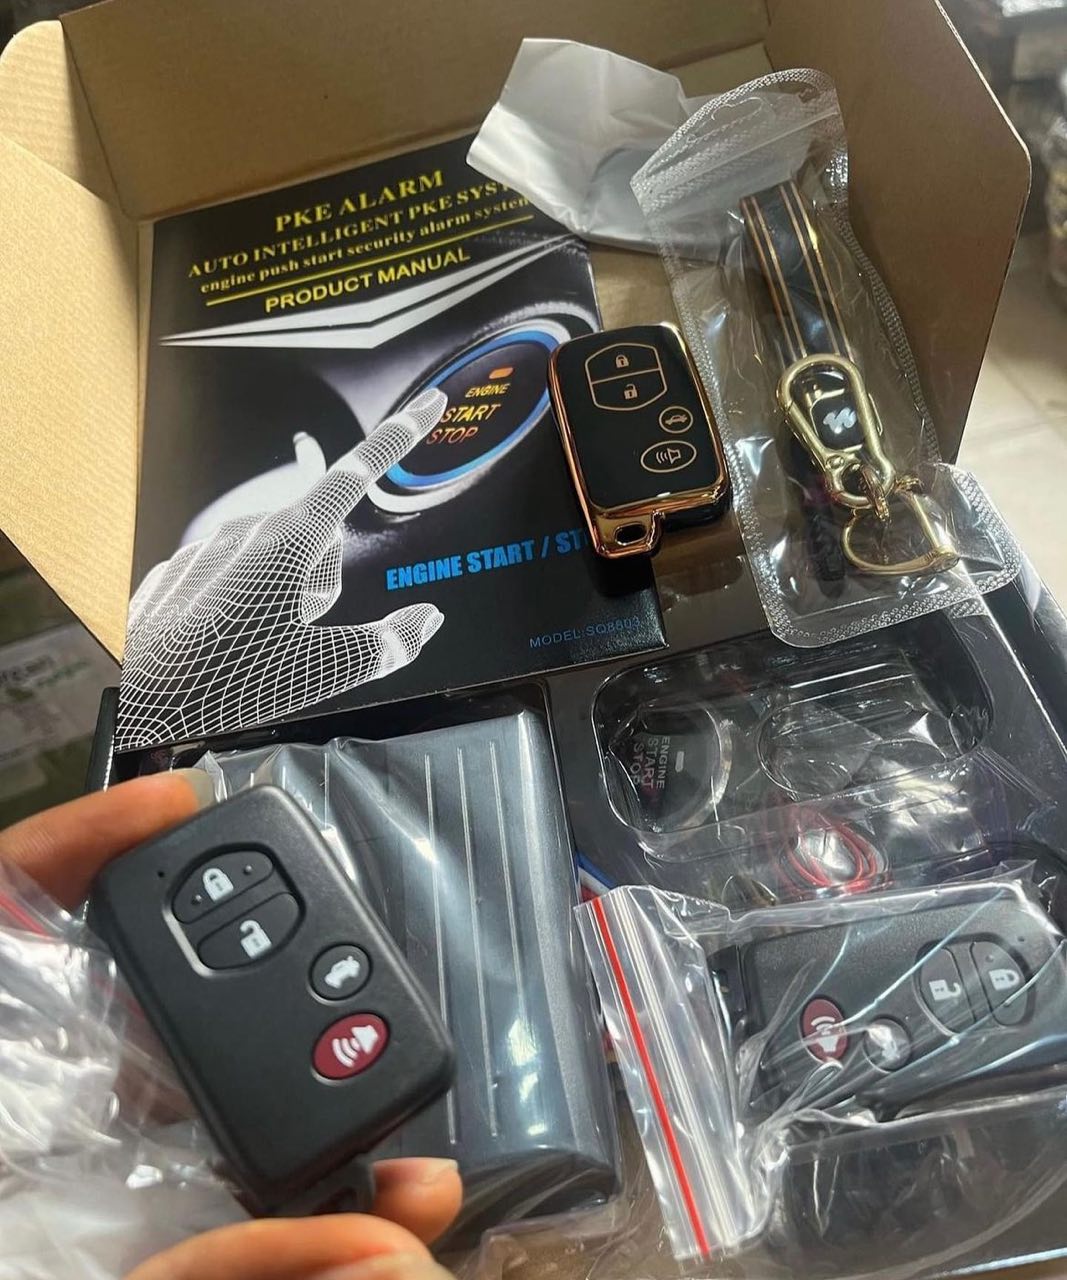 Adding Keyless Entry to Car - All You Need to Know 